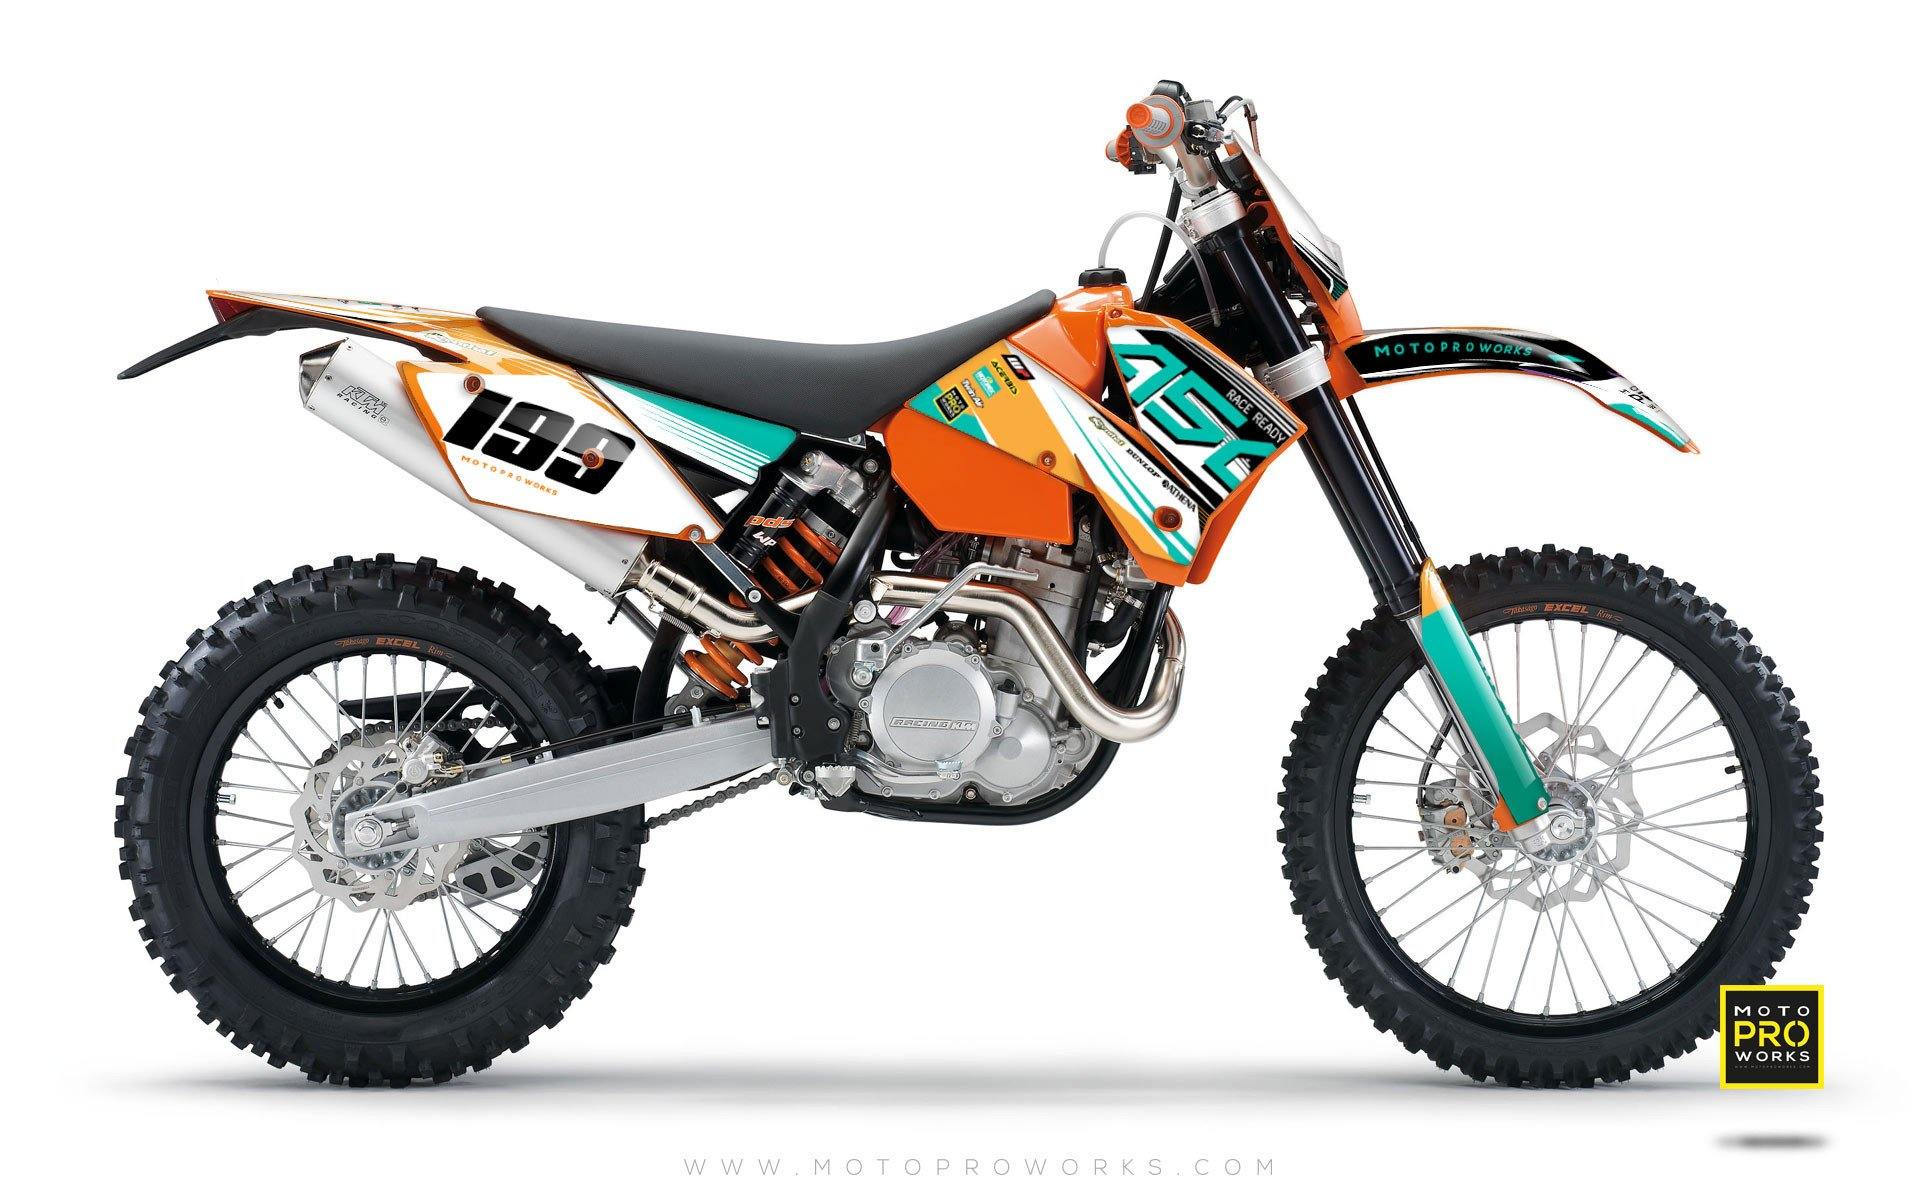 KTM GRAPHIC KIT - "GOFAST" (minty) - MotoProWorks | Decals and Bike Graphic kit